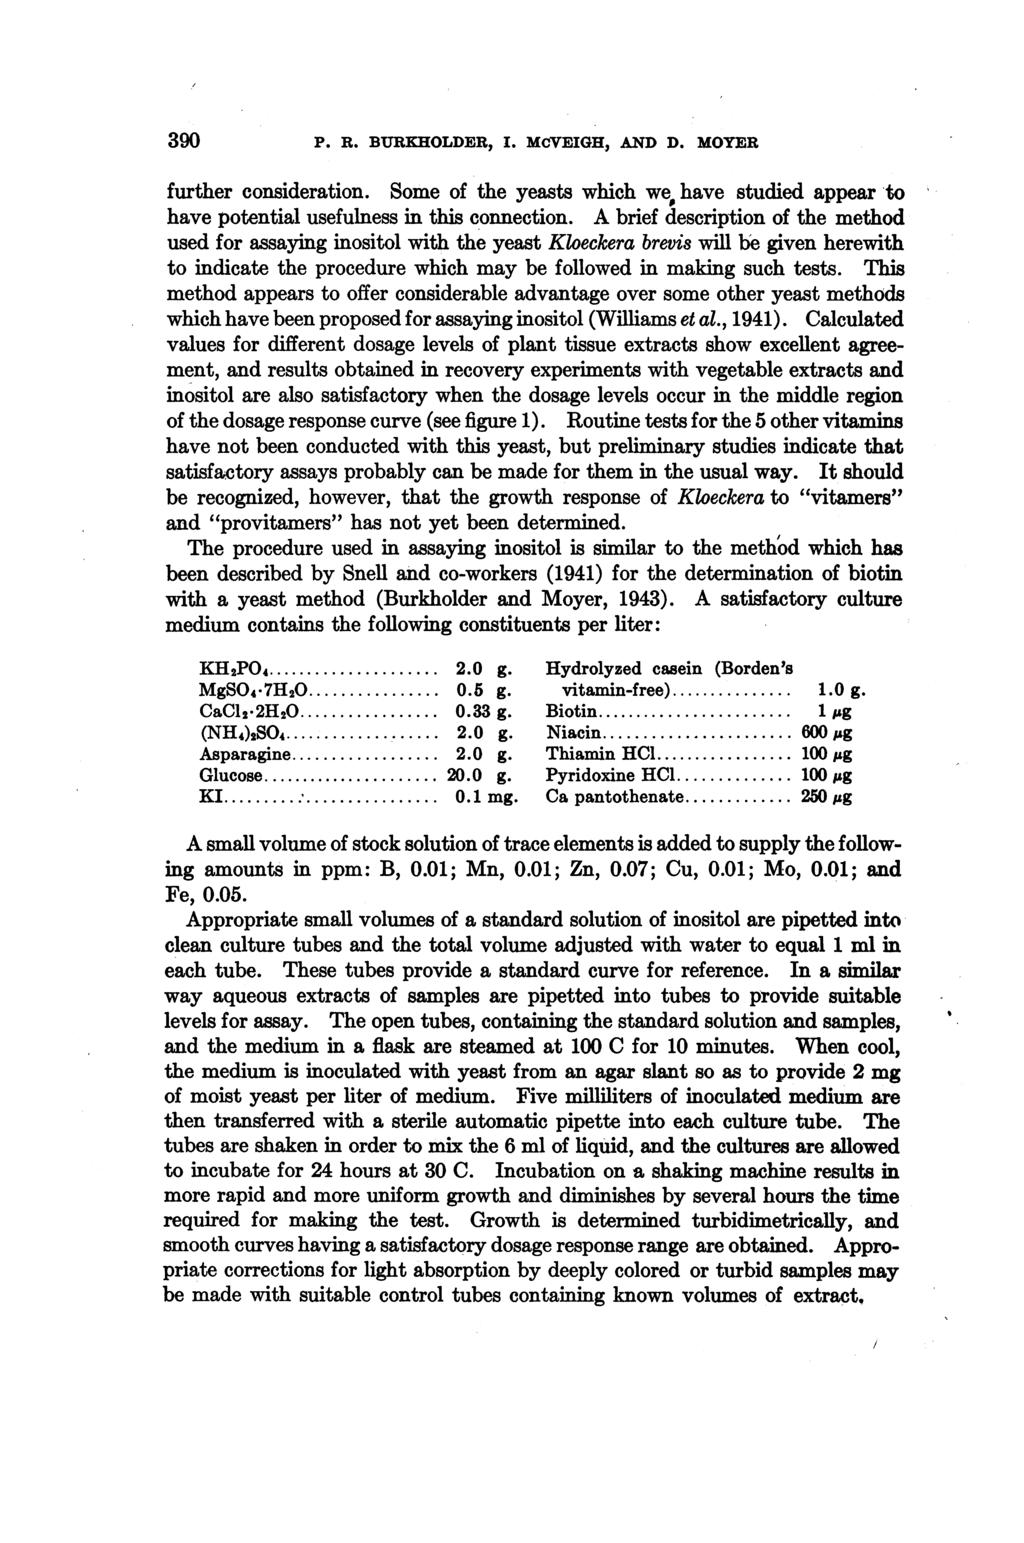 390 P. R. BURKHOLDER, I. MCVEIGH, AND D. MOYER further consideration. Some of the yeasts which we, have studied appear to have potential usefulness in this connection.